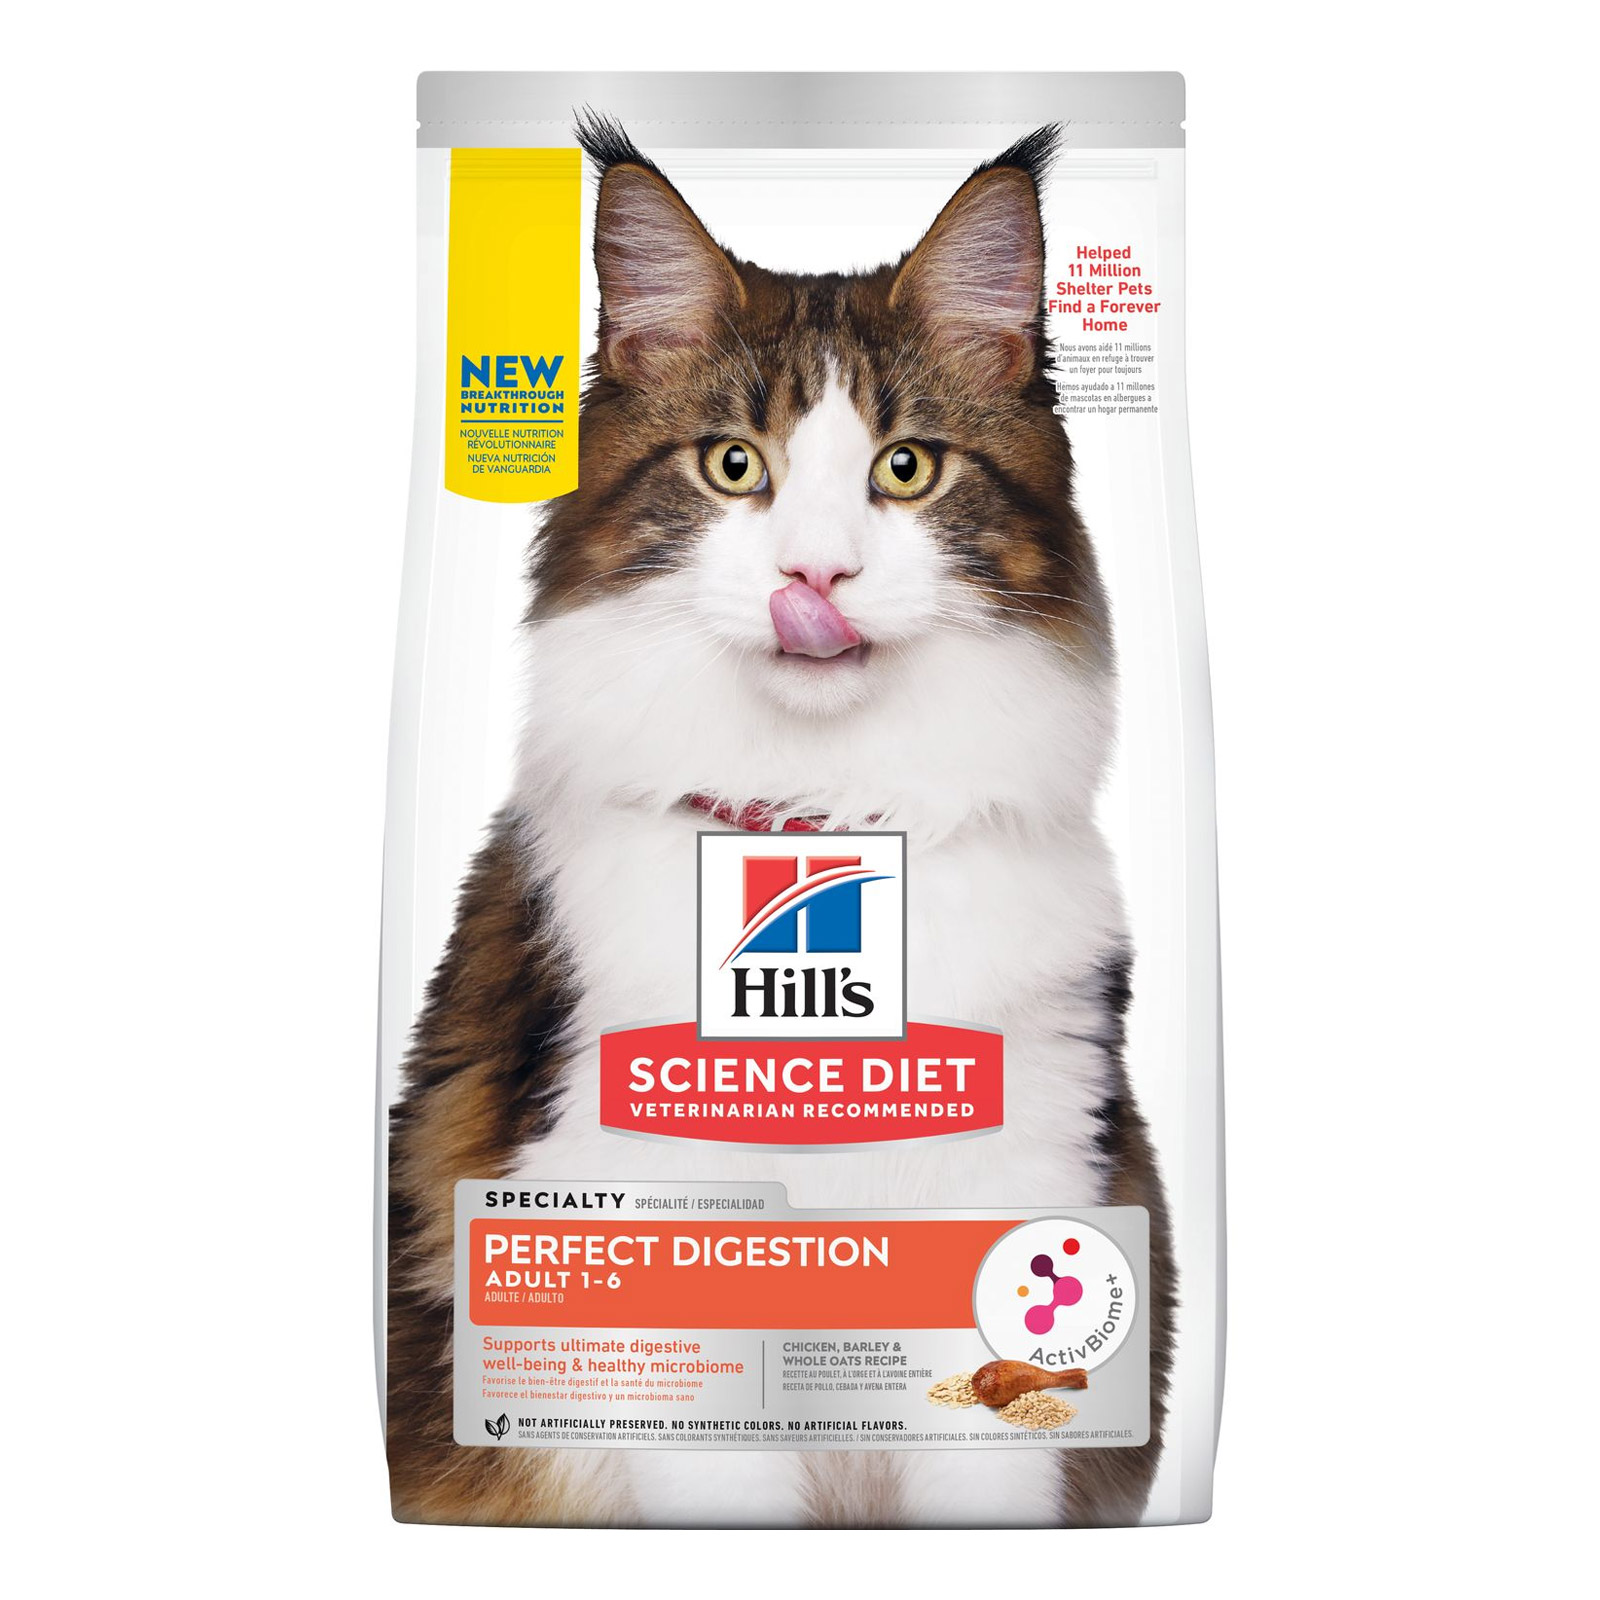 Hill's Science Diet Perfect Digestion Adult Dry Cat Food for Food